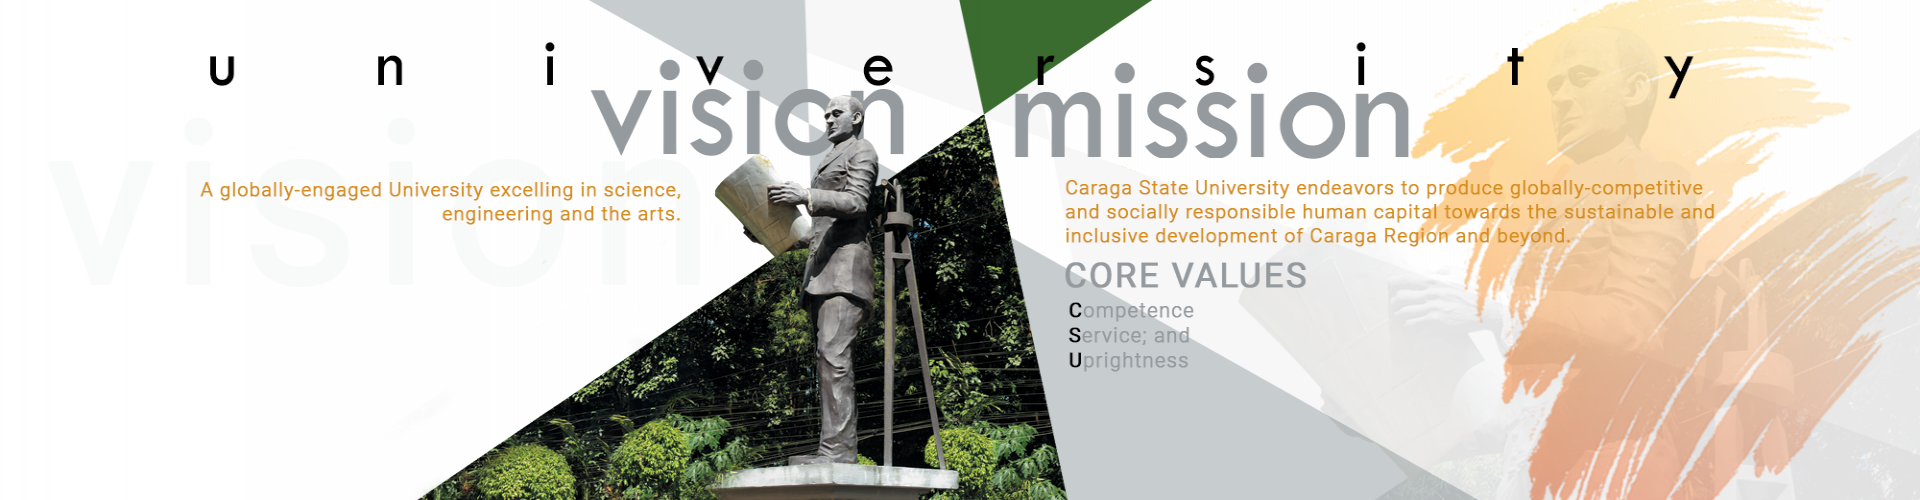 CSU Vision, Mission and Core Values